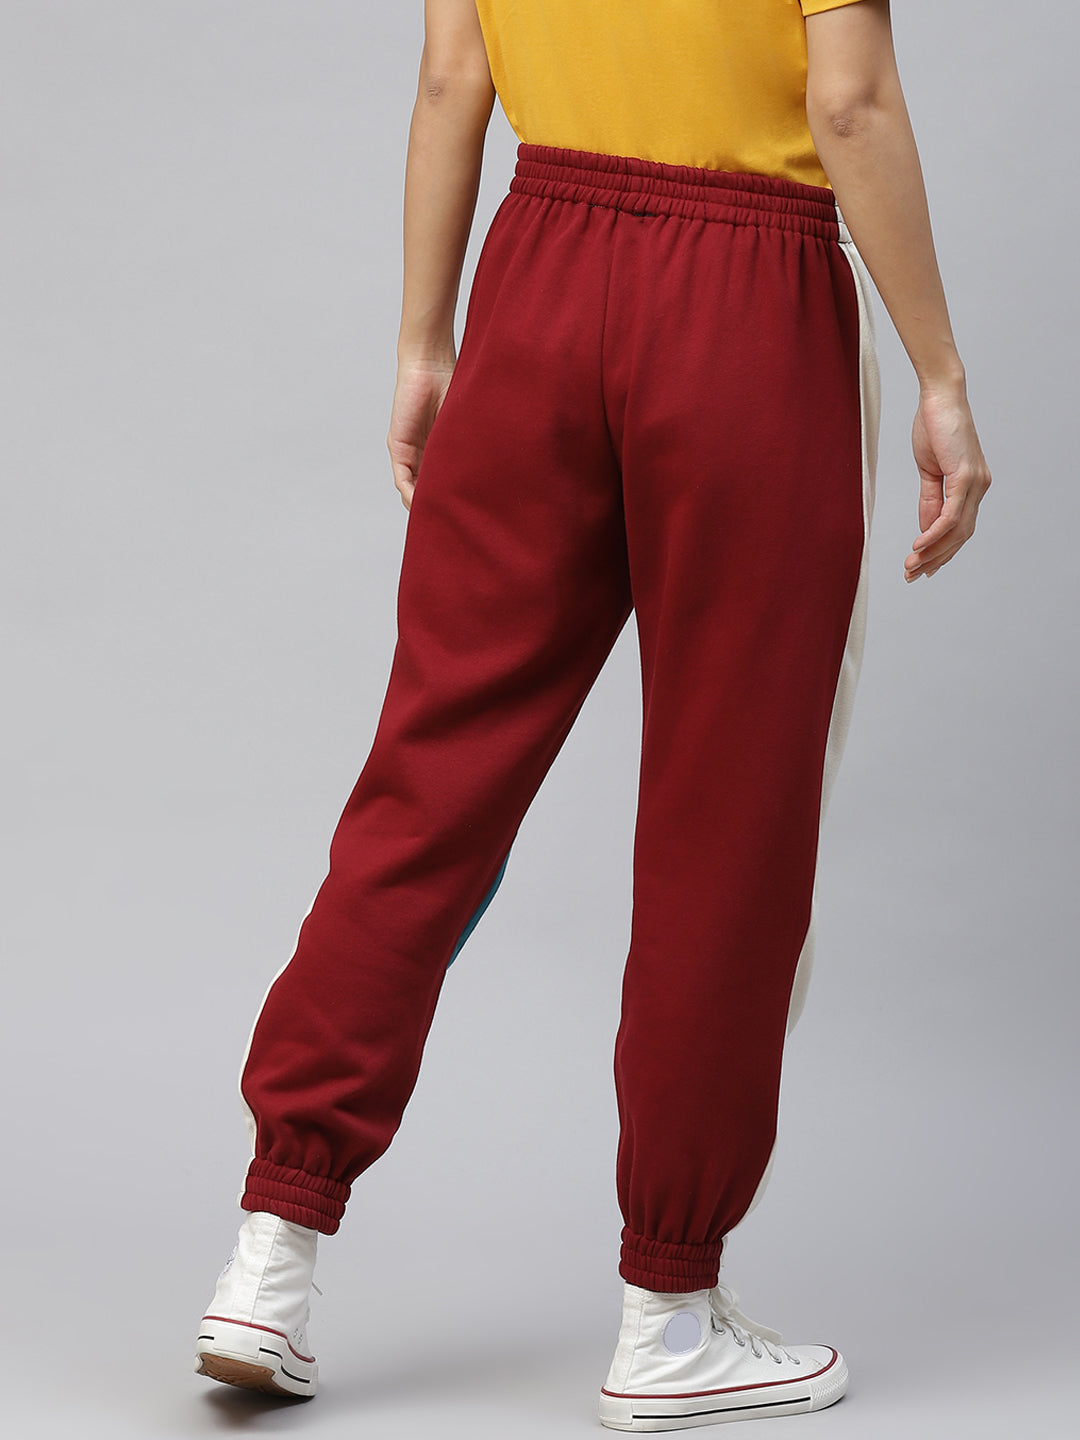 Laabha Women Maroon  Teal Blue Colourblocked Joggers with Side Taping Detail